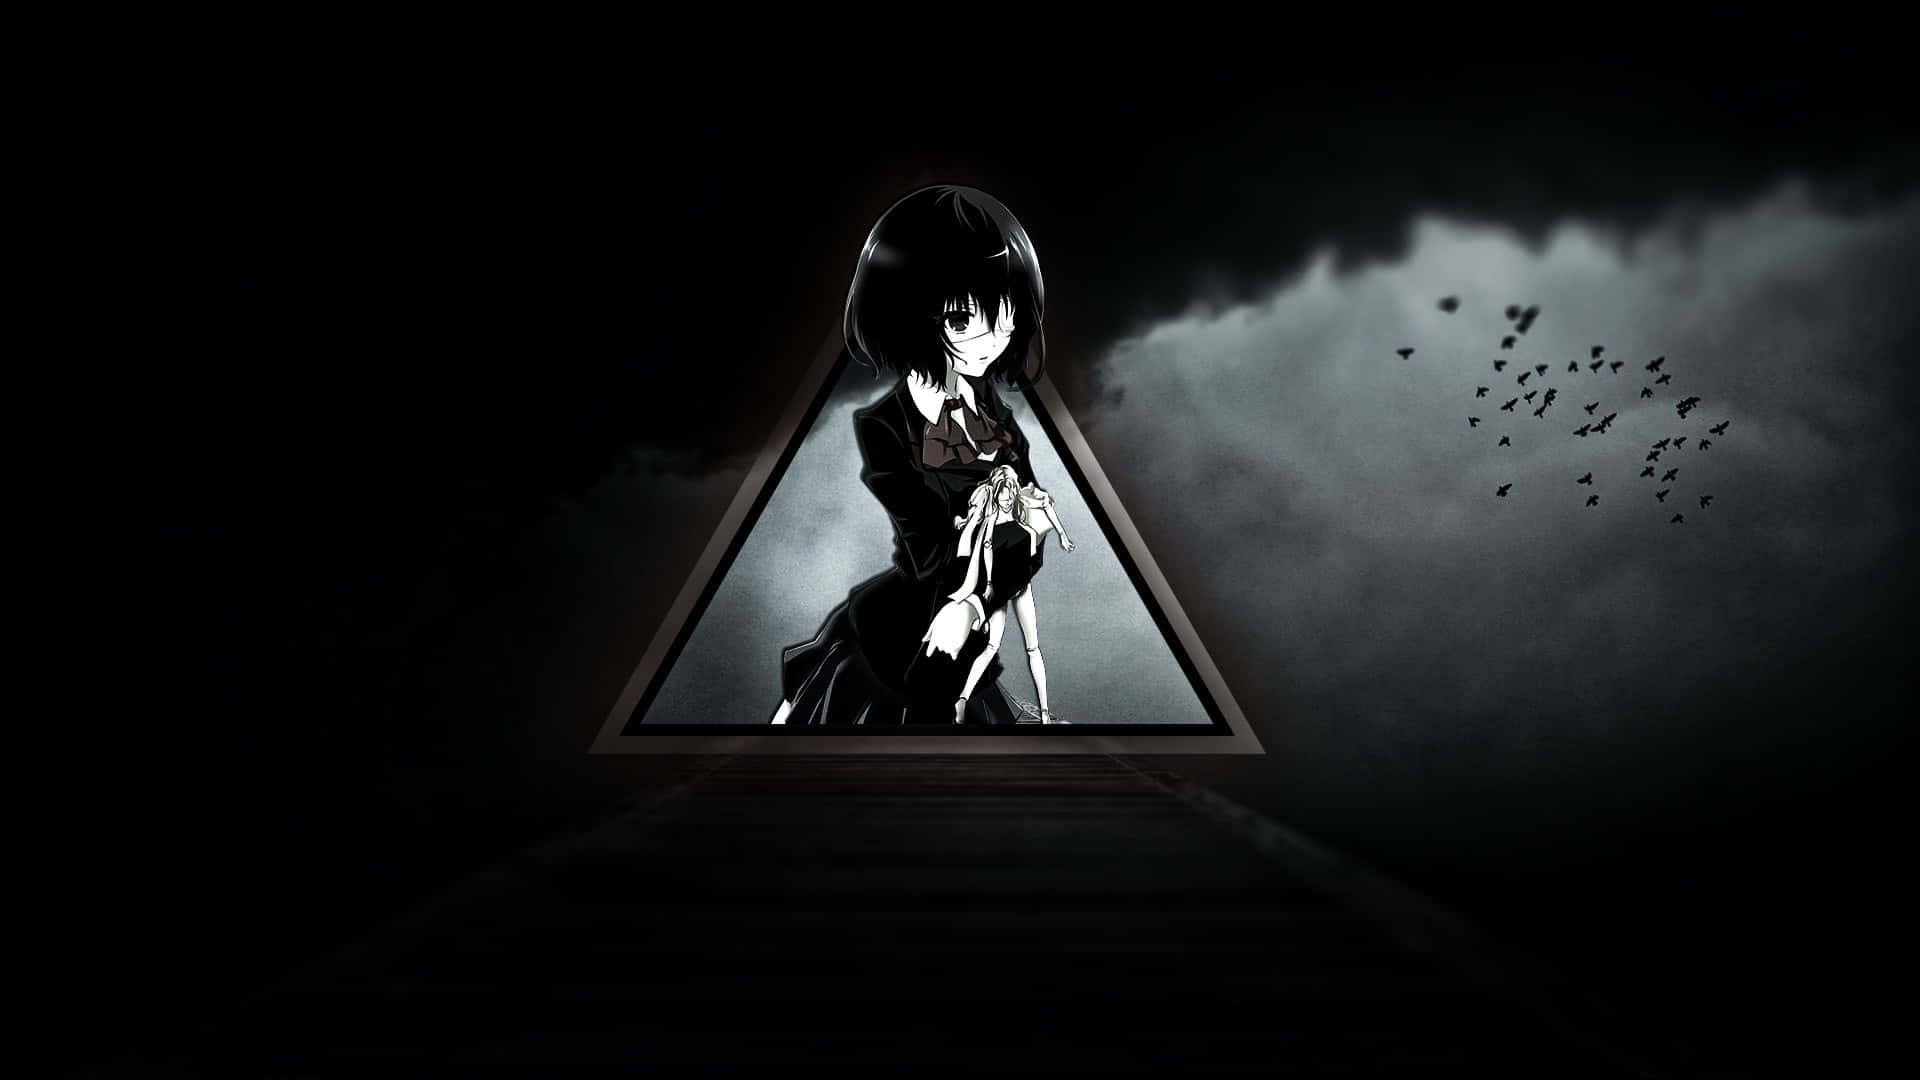 A Girl Is Standing In A Dark Room With A Triangle In The Background